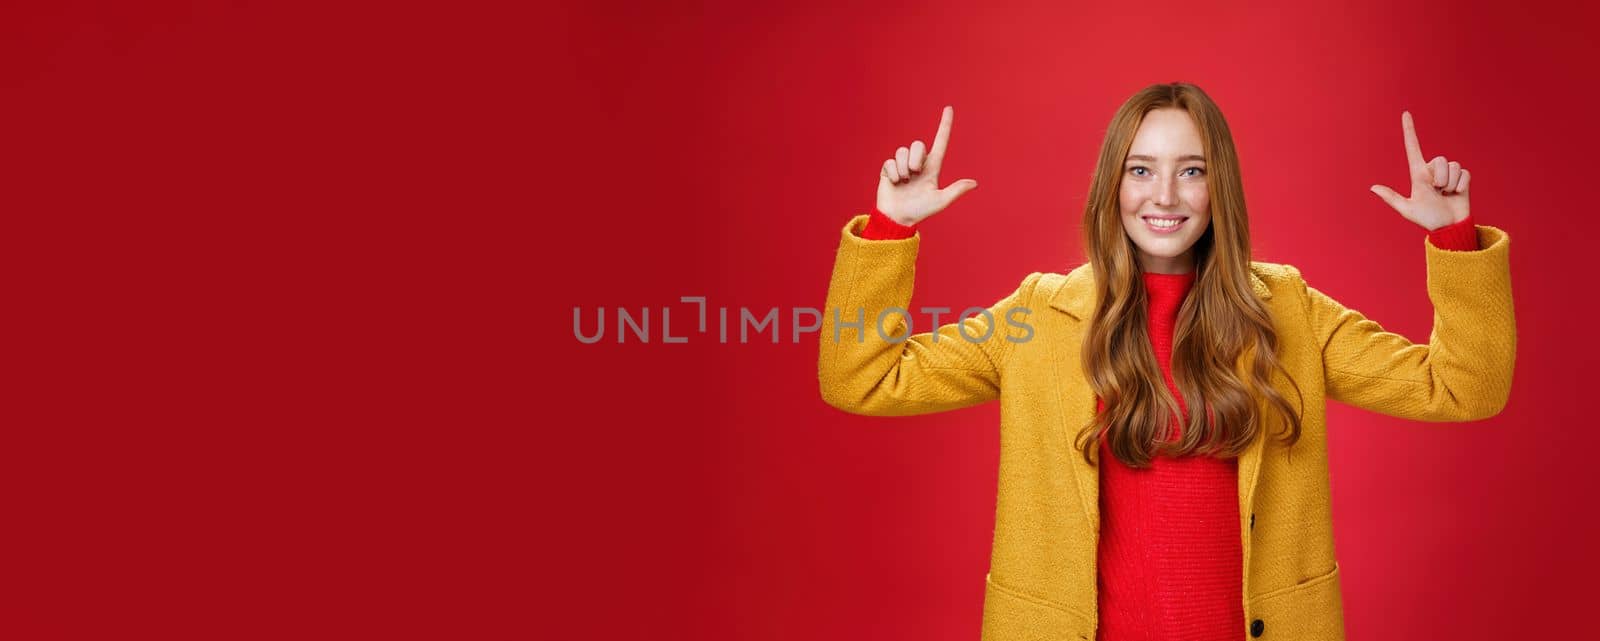 Indoor shot of redhead attractive woman in yellow fall coat raising hands promoting advertisement as pointing up and smiling broadly with satisfied pleasant expression over red background. Copy space